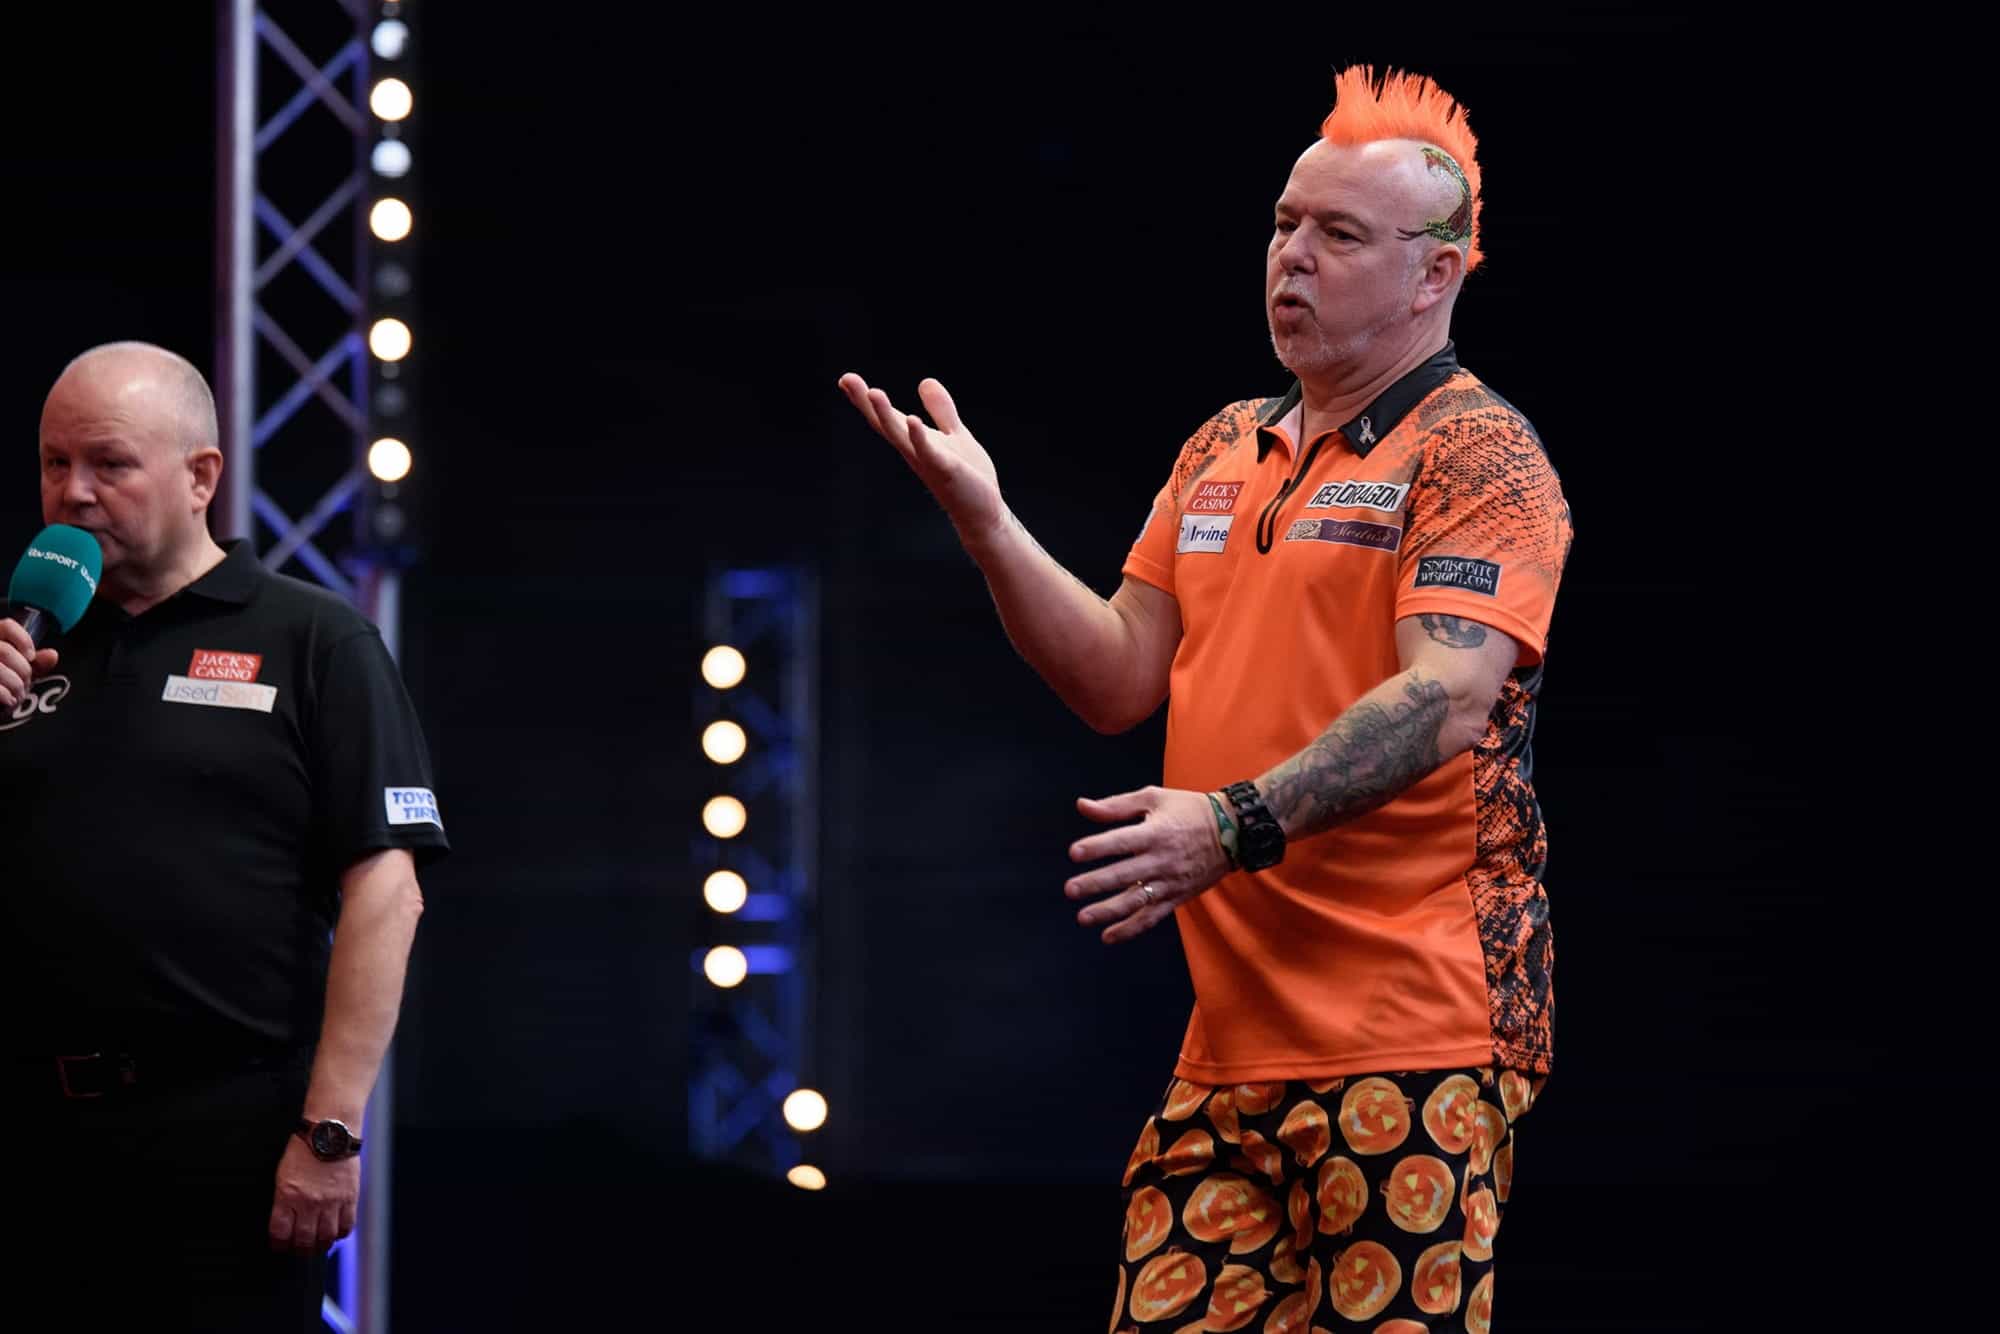 Peter Wright looking dismayed after missing a double.